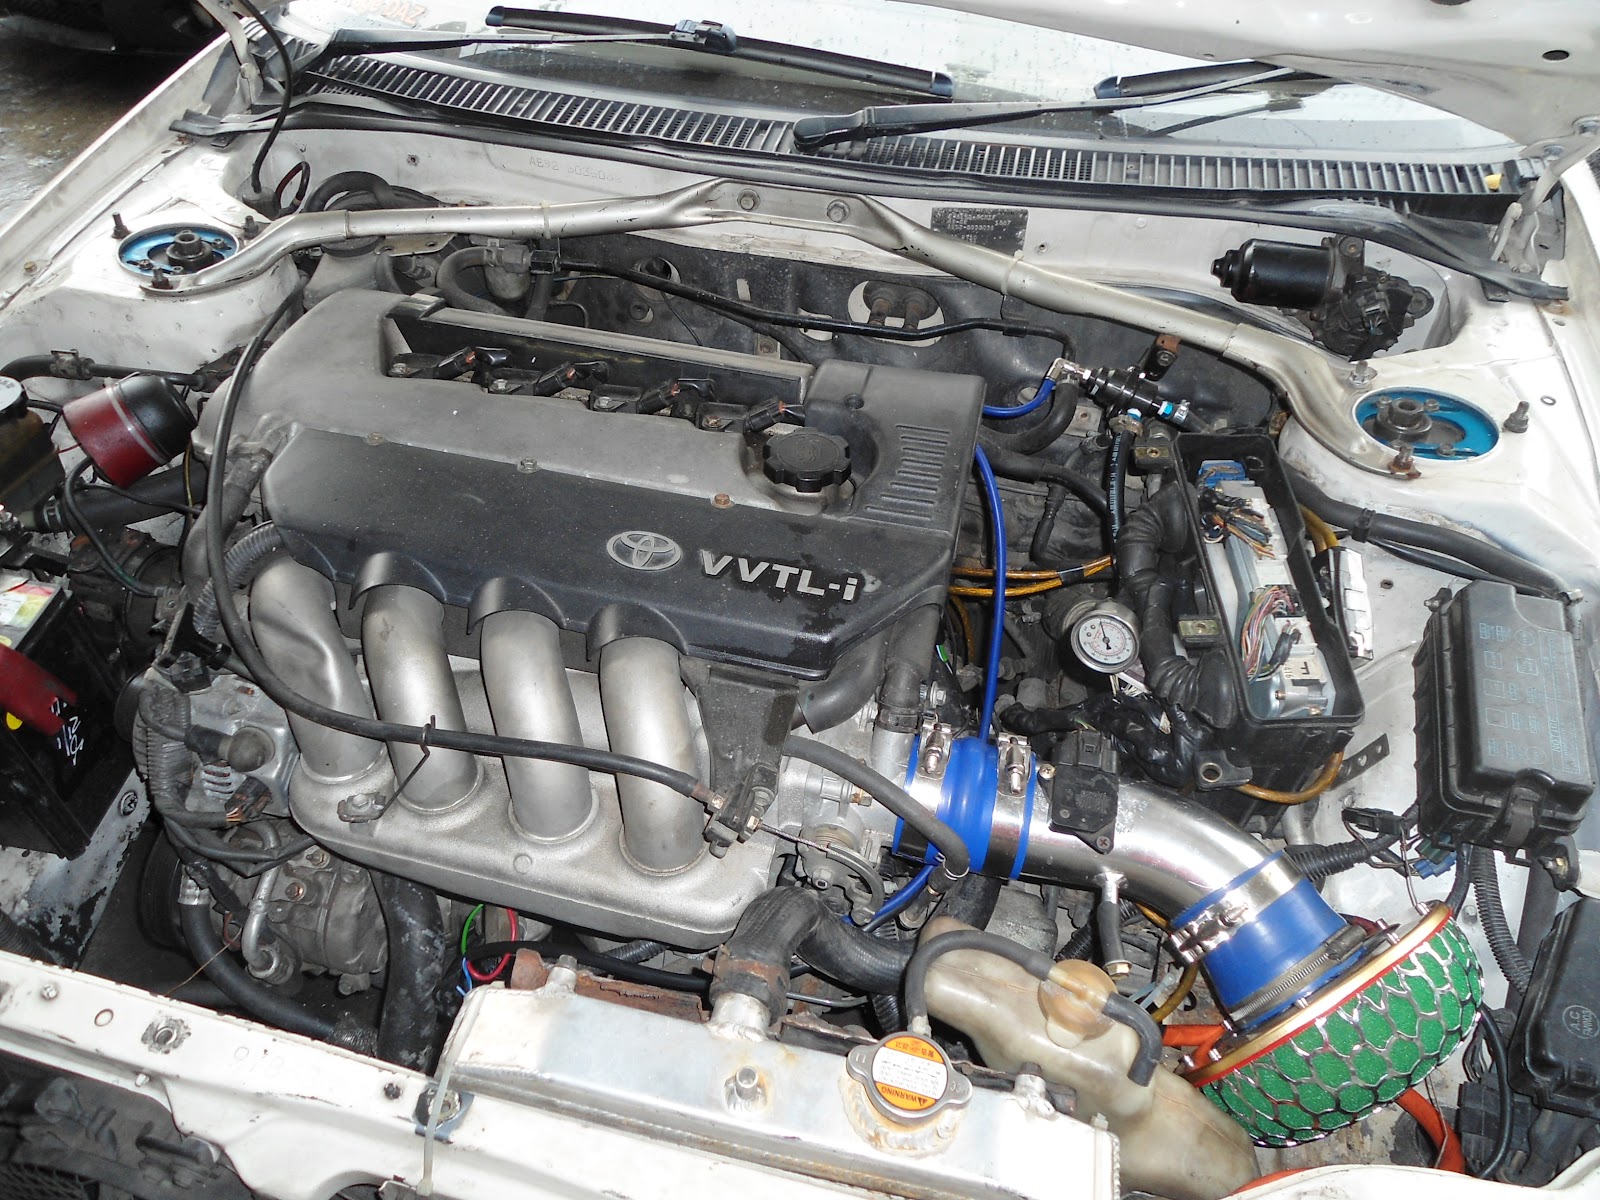 R.N.R AUTOSPORT - VEHICLE WIRING AND ENGINE MANAGEMENT TUNING: Engine